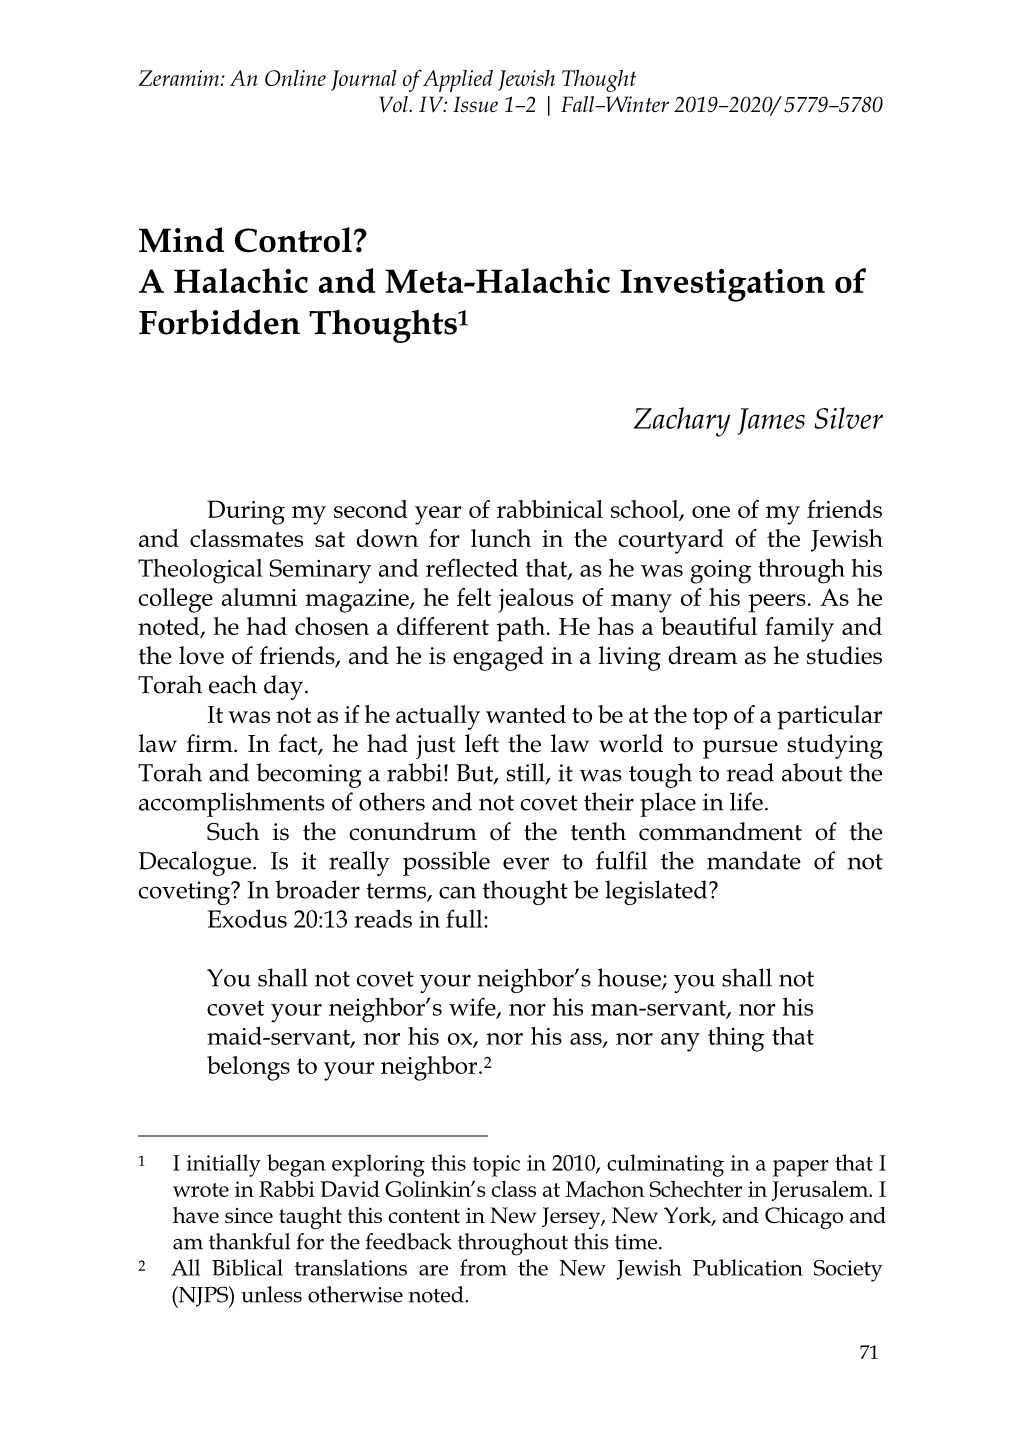 Mind Control? a Halachic and Meta-Halachic Investigation of Forbidden Thoughts1